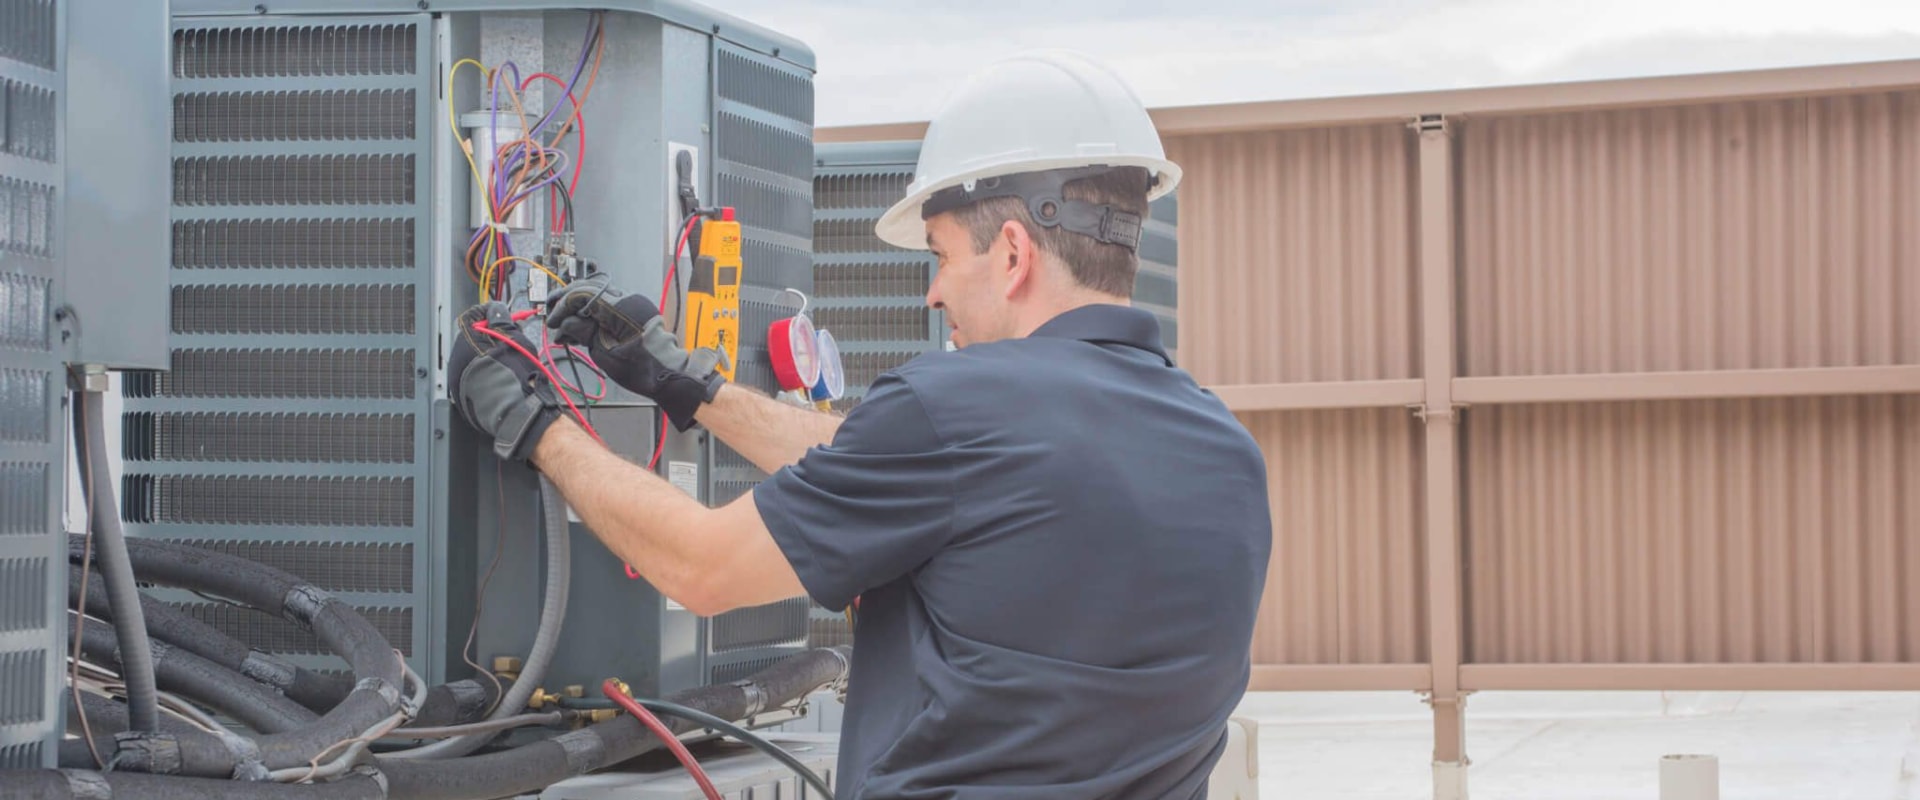 Do You Really Need to Have Your HVAC Serviced Every Year? - An Expert's Perspective